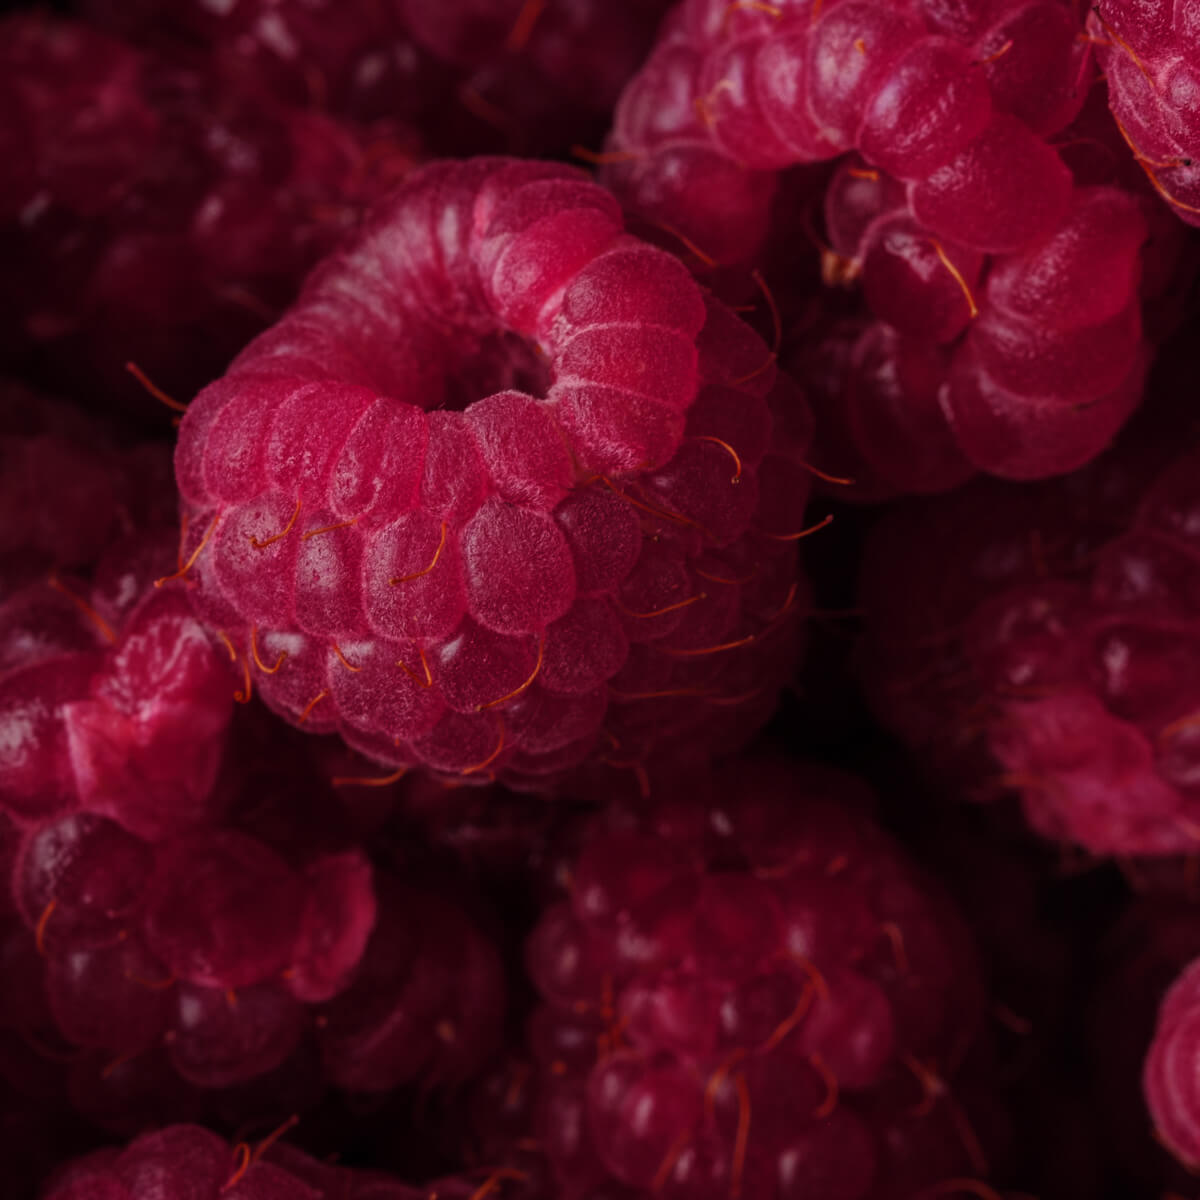 Fresh red fruits guarantee the perfect aroma of EFFEN raspberry flavored vodka.